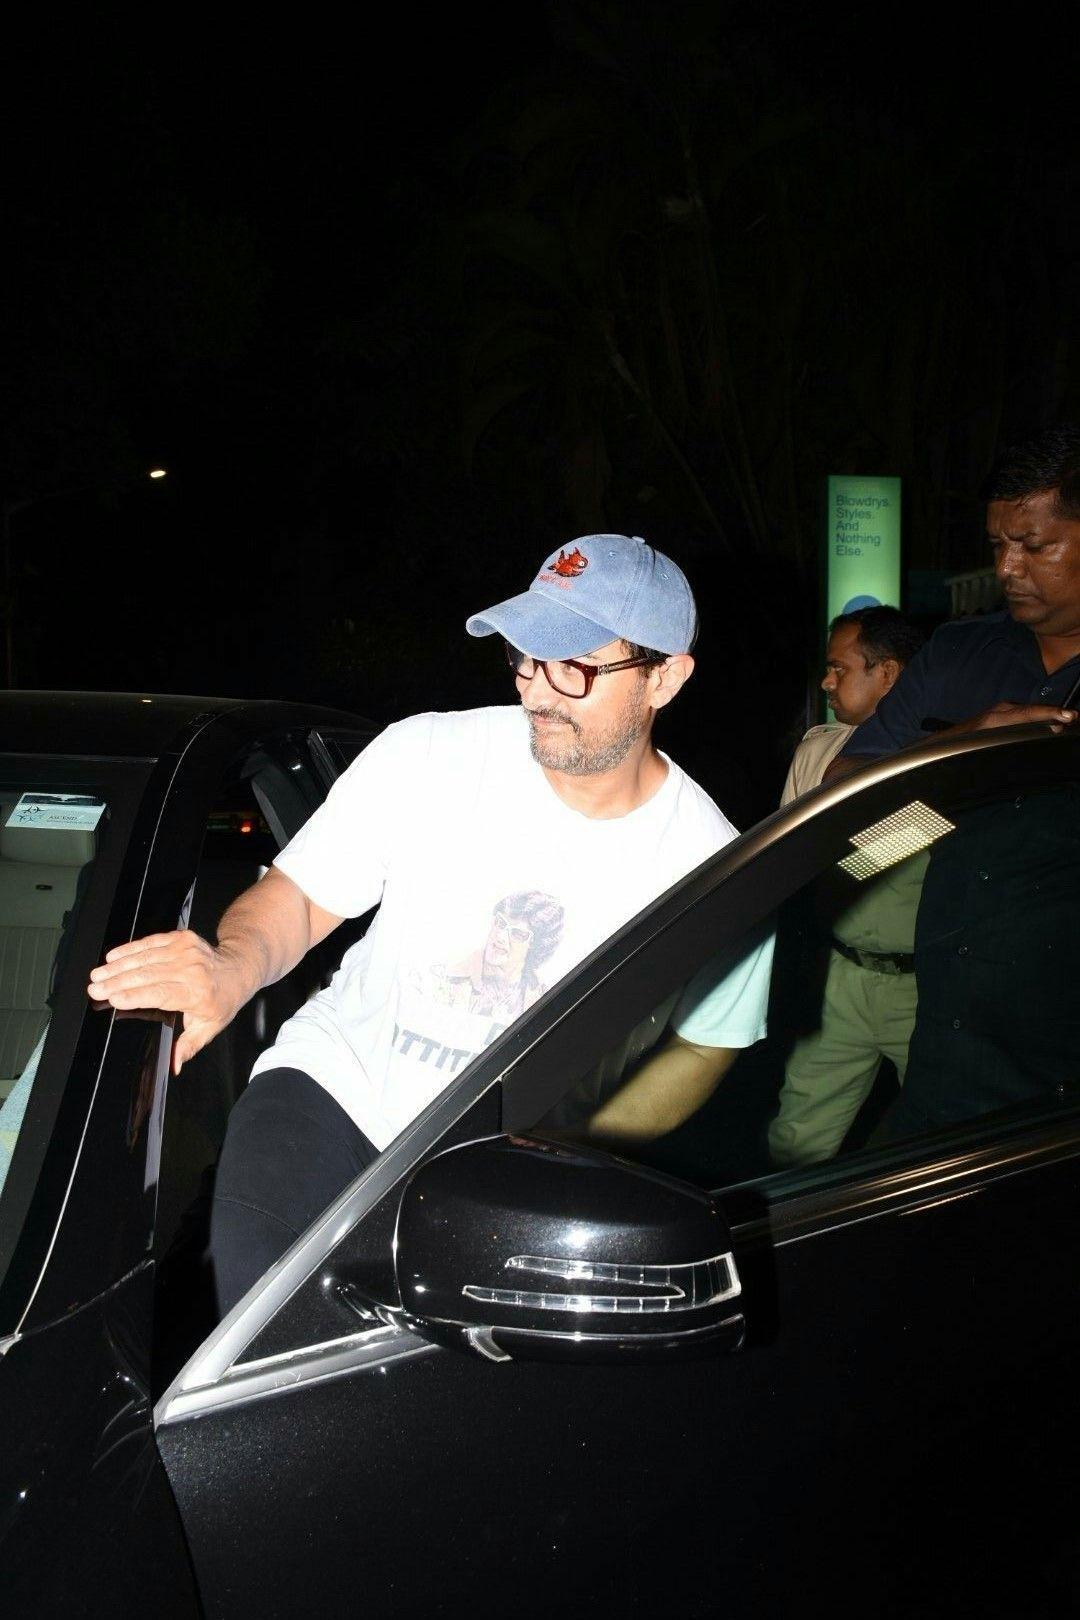 Aamir Khan spotted outside a Juice shop by night in Mumbai